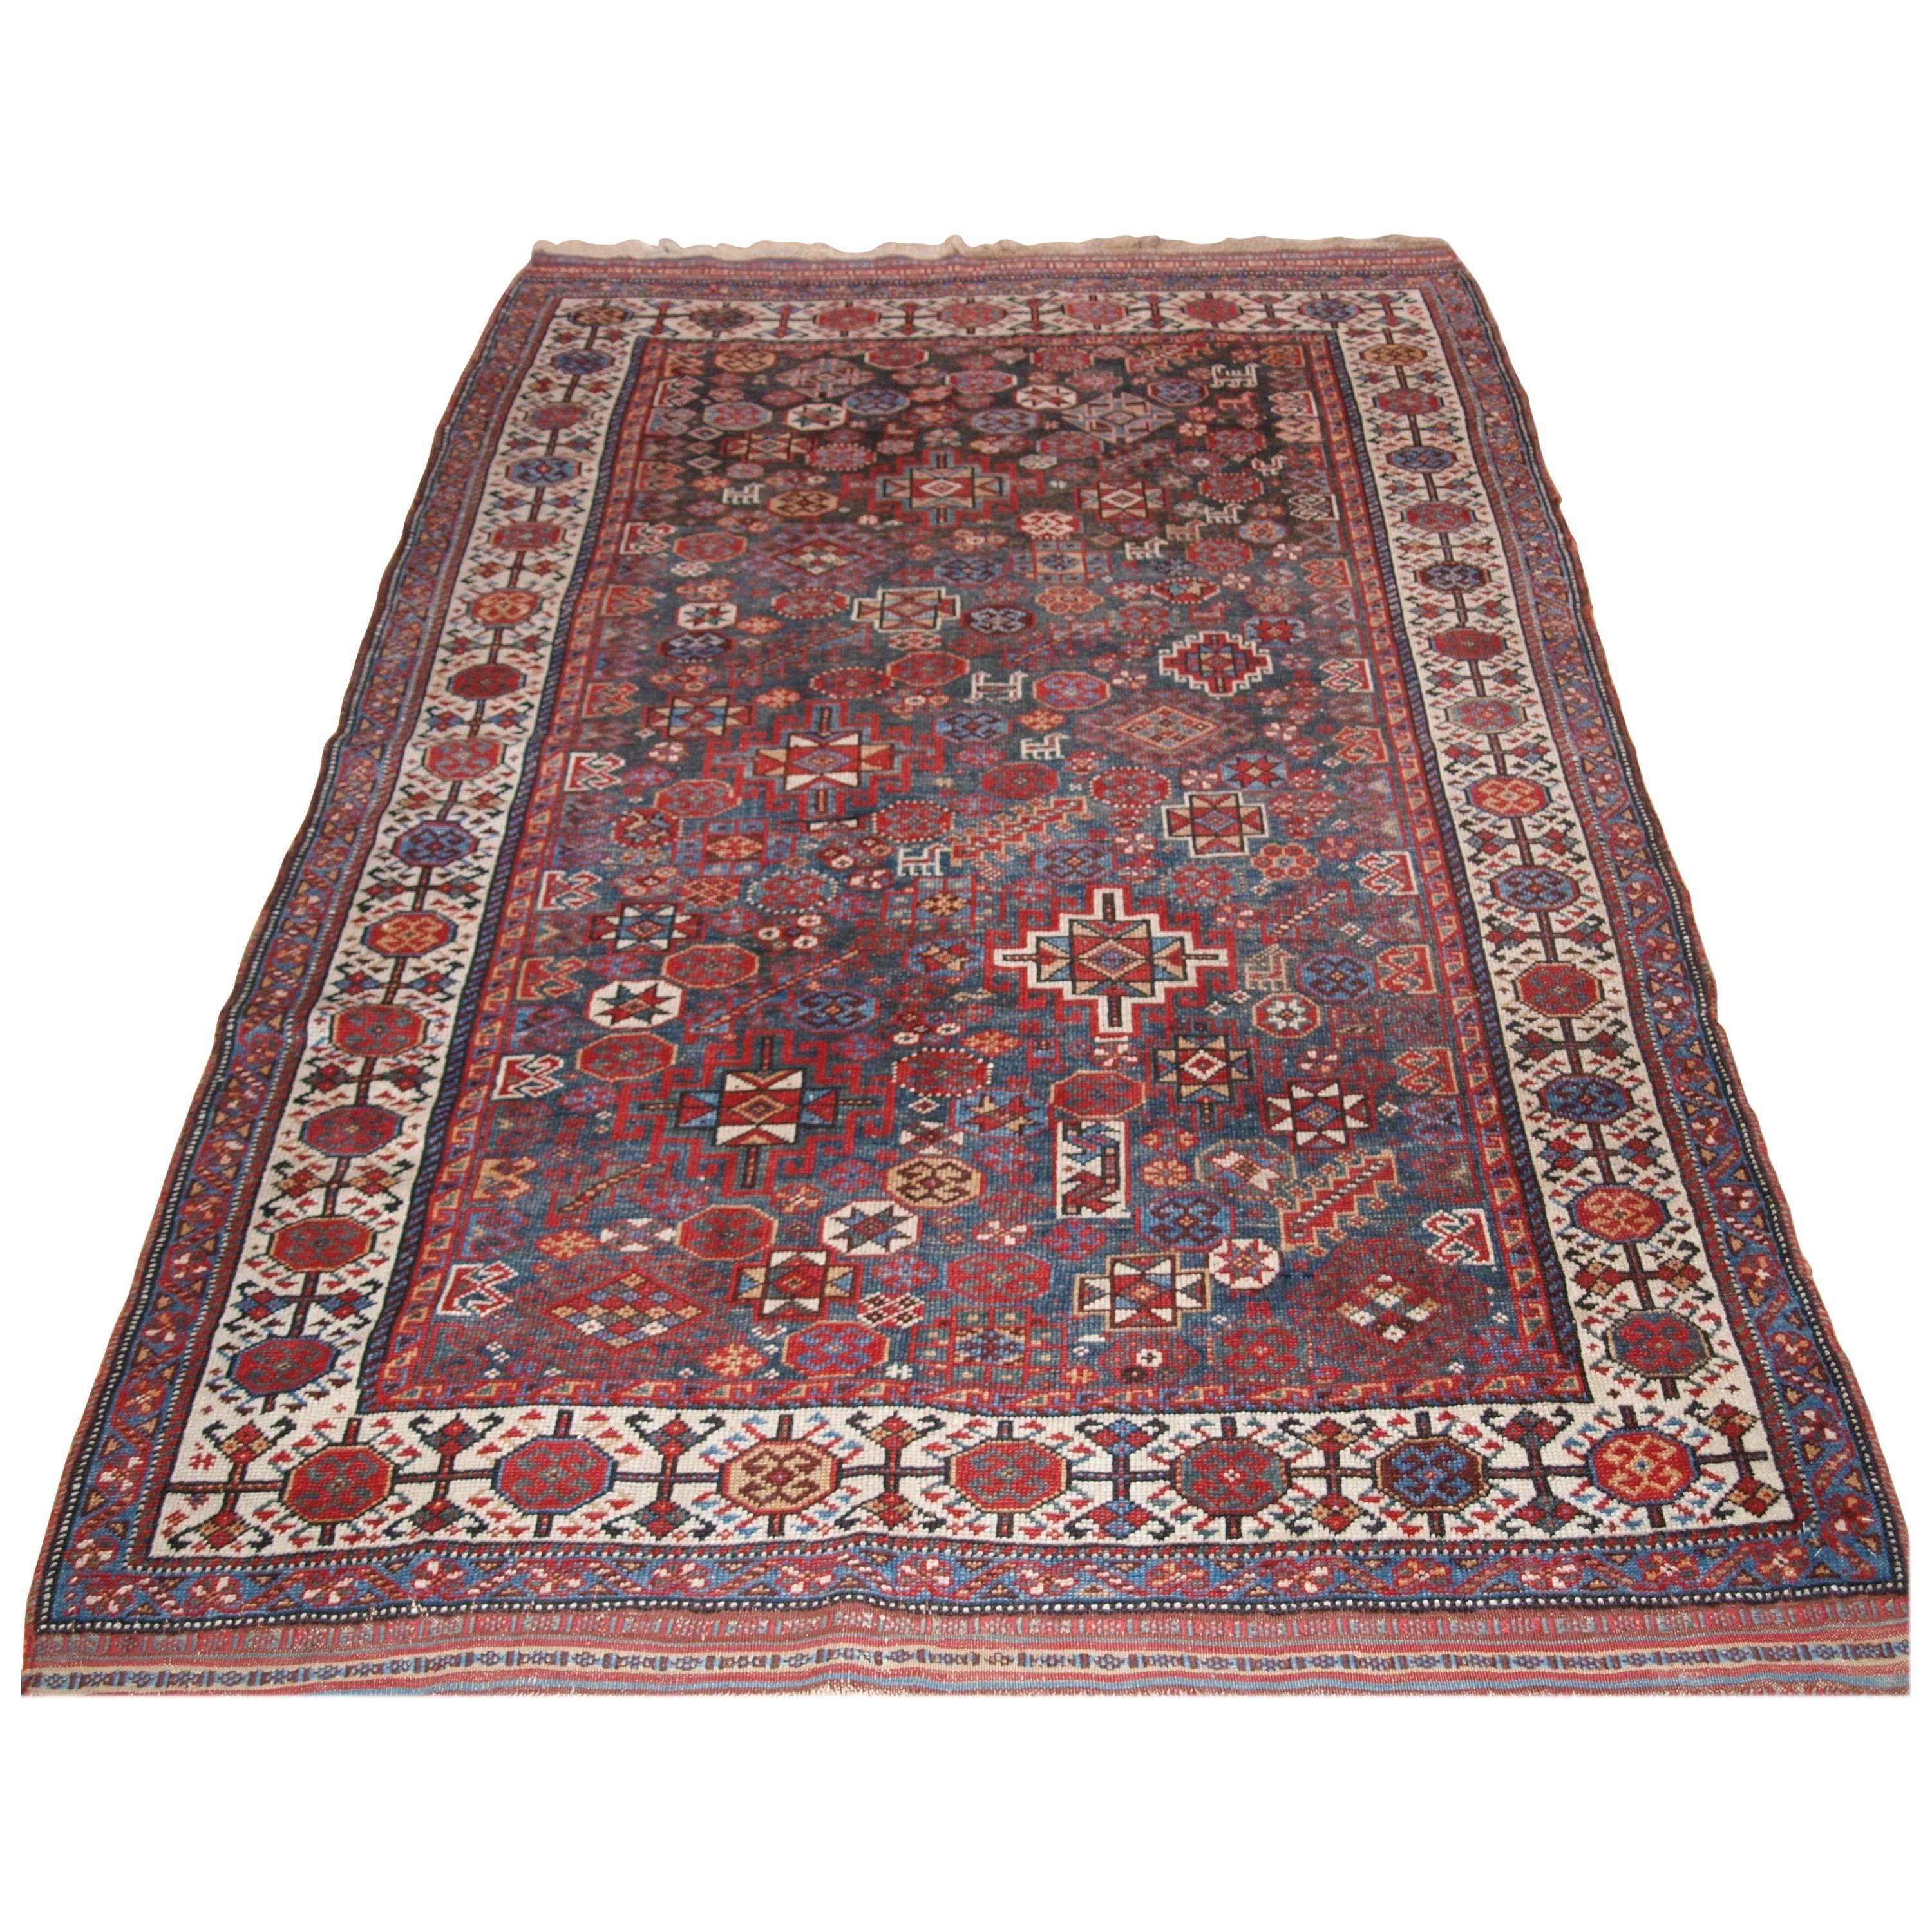 Antique Persian Rug by the Luri Tribe, Shekarlu Design, Grey Blue, circa 1900 For Sale